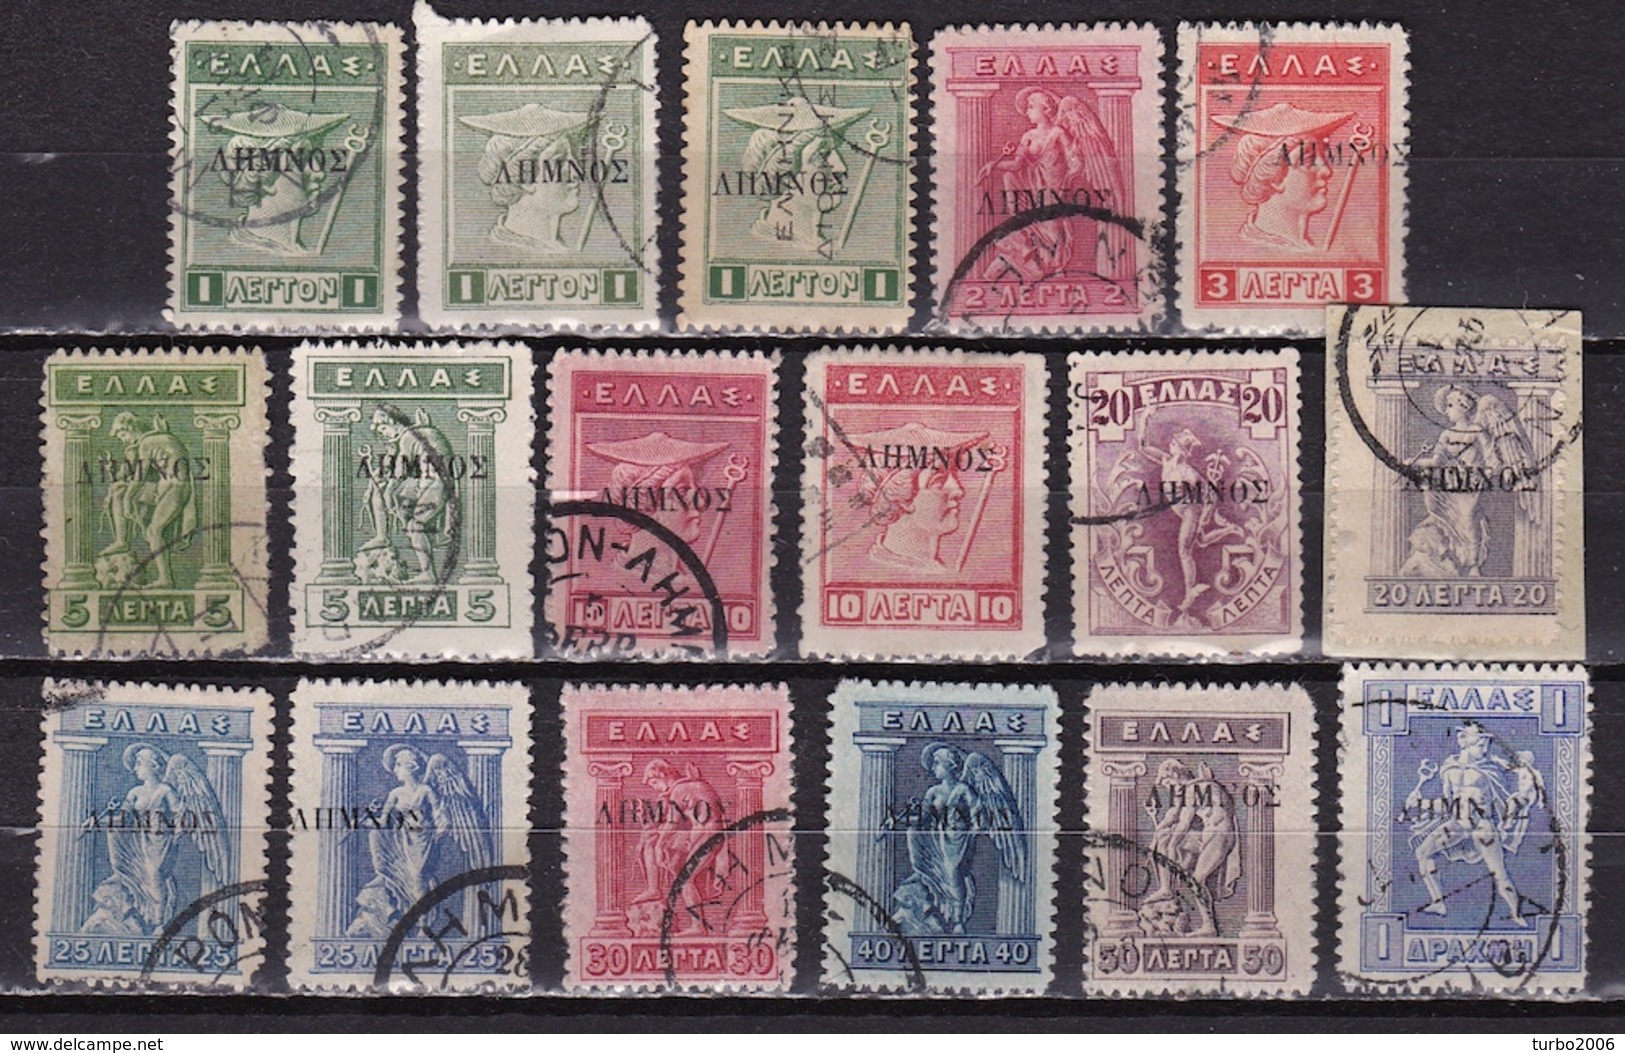 LEMNOS 1912  Issue With Black LEMNOS Overprint Complete Used Set To 1 Dr. Vl. 1 / 17 - Lemnos